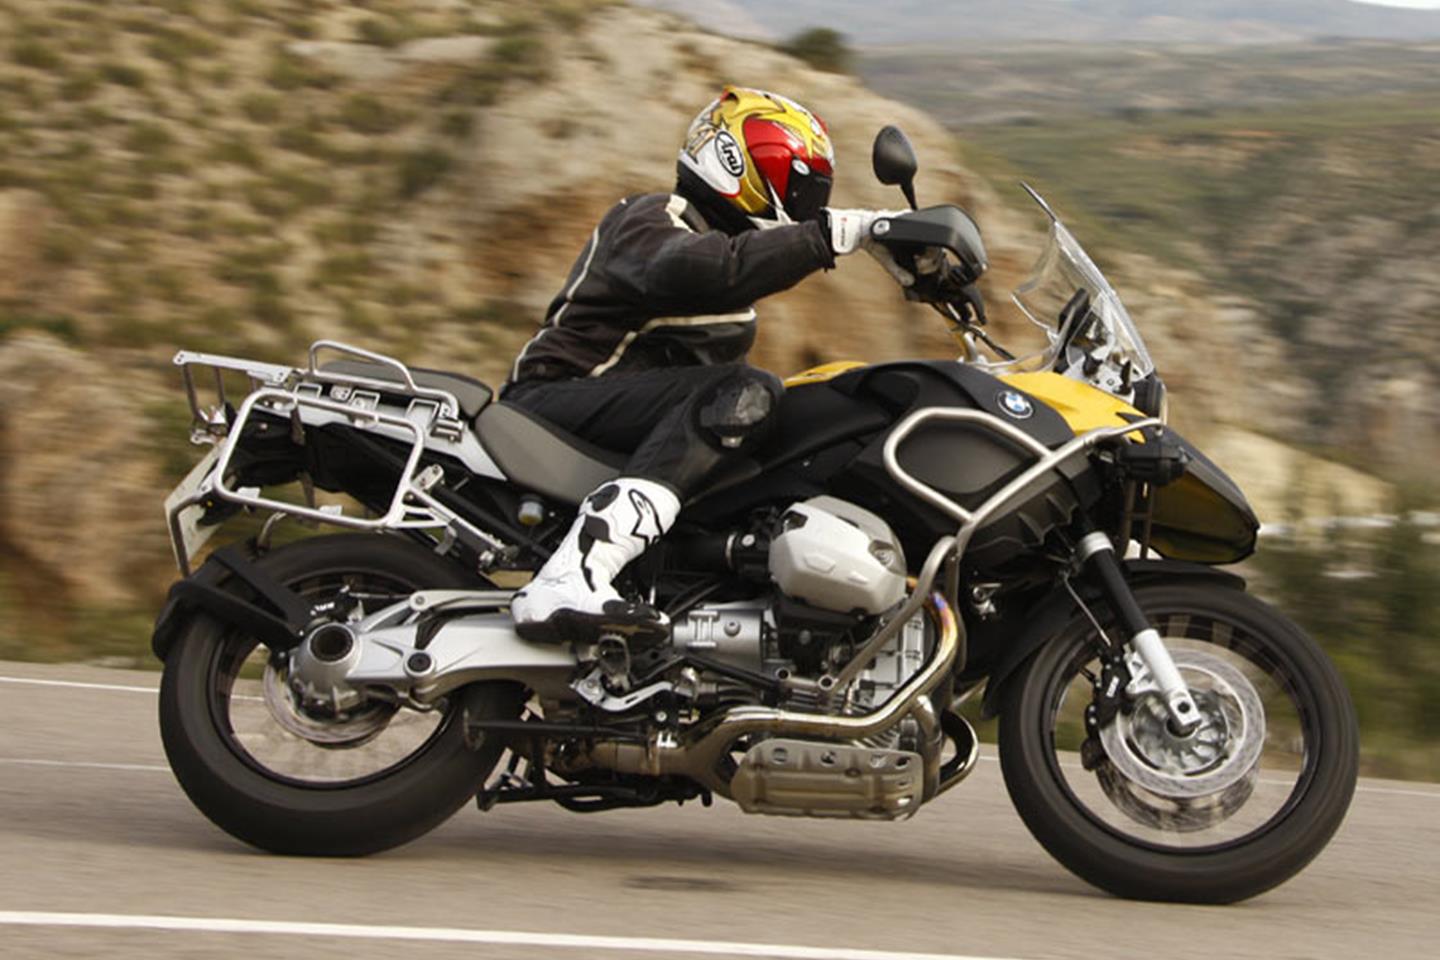 BMW R1200GS ADVENTURE (2010-2013) Motorcycle Review